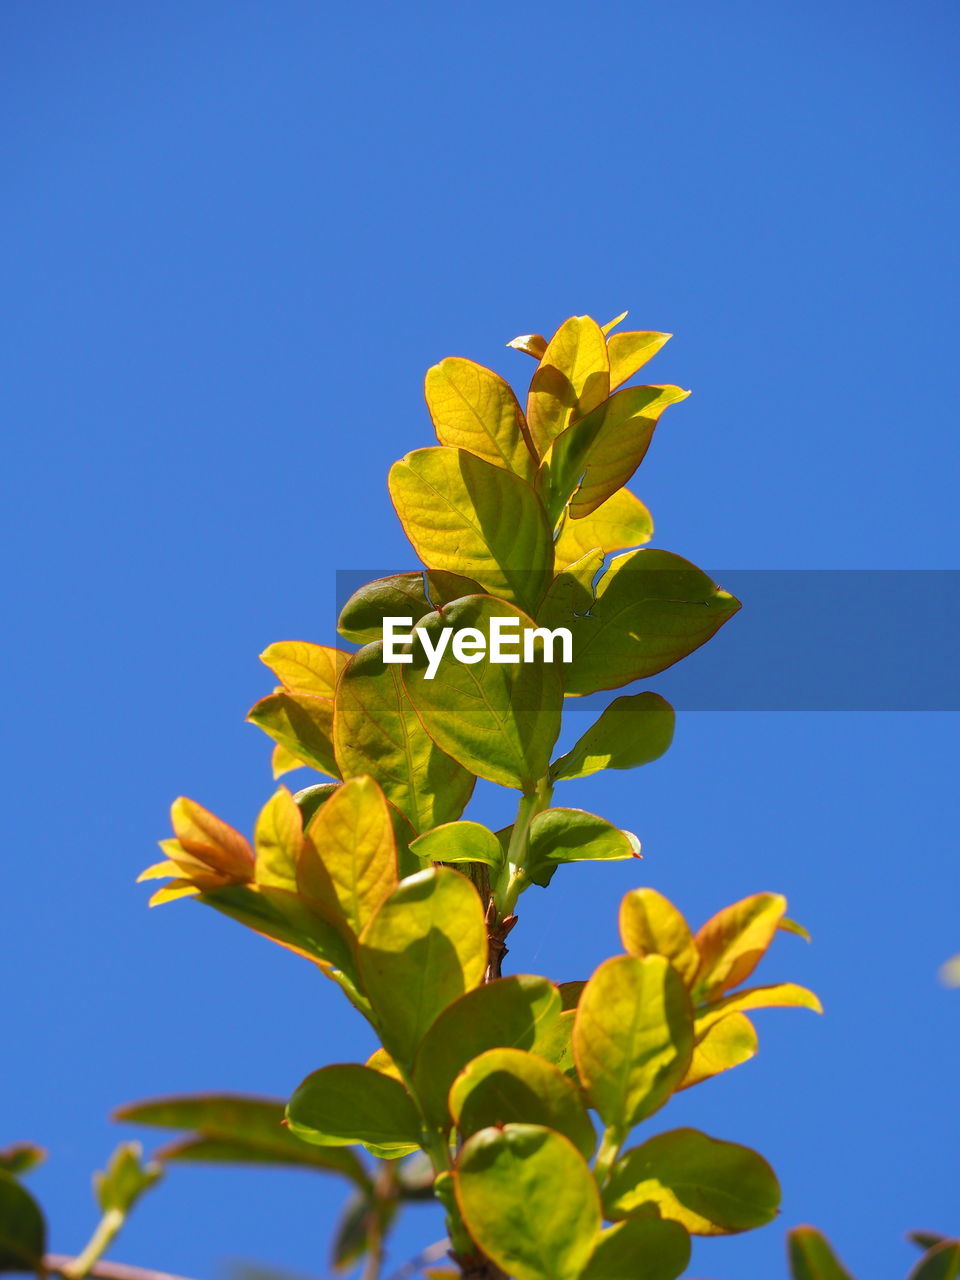 CLOSE-UP OF YELLOW FLOWERING PLANT AGAINST CLEAR BLUE SKY